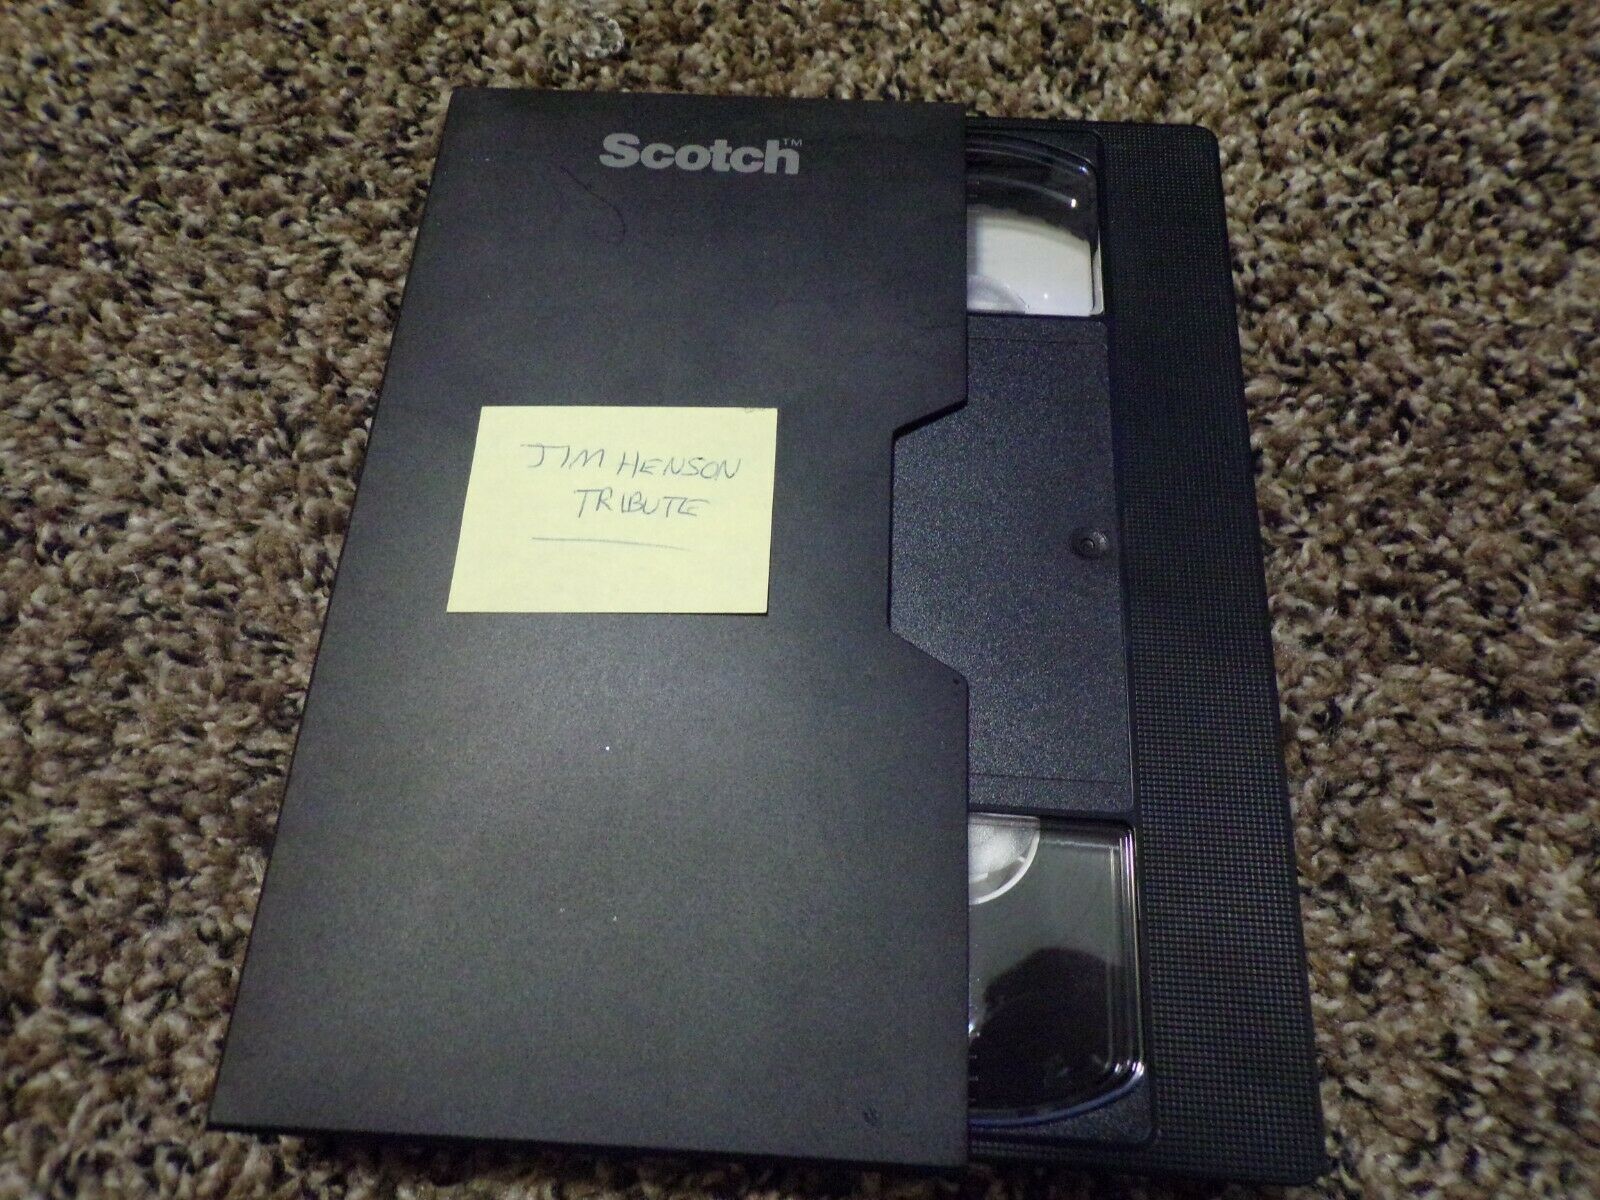 Muppets Celebrate Jim Henson 11/21/90 With Commercials Vhs Sold As Blank